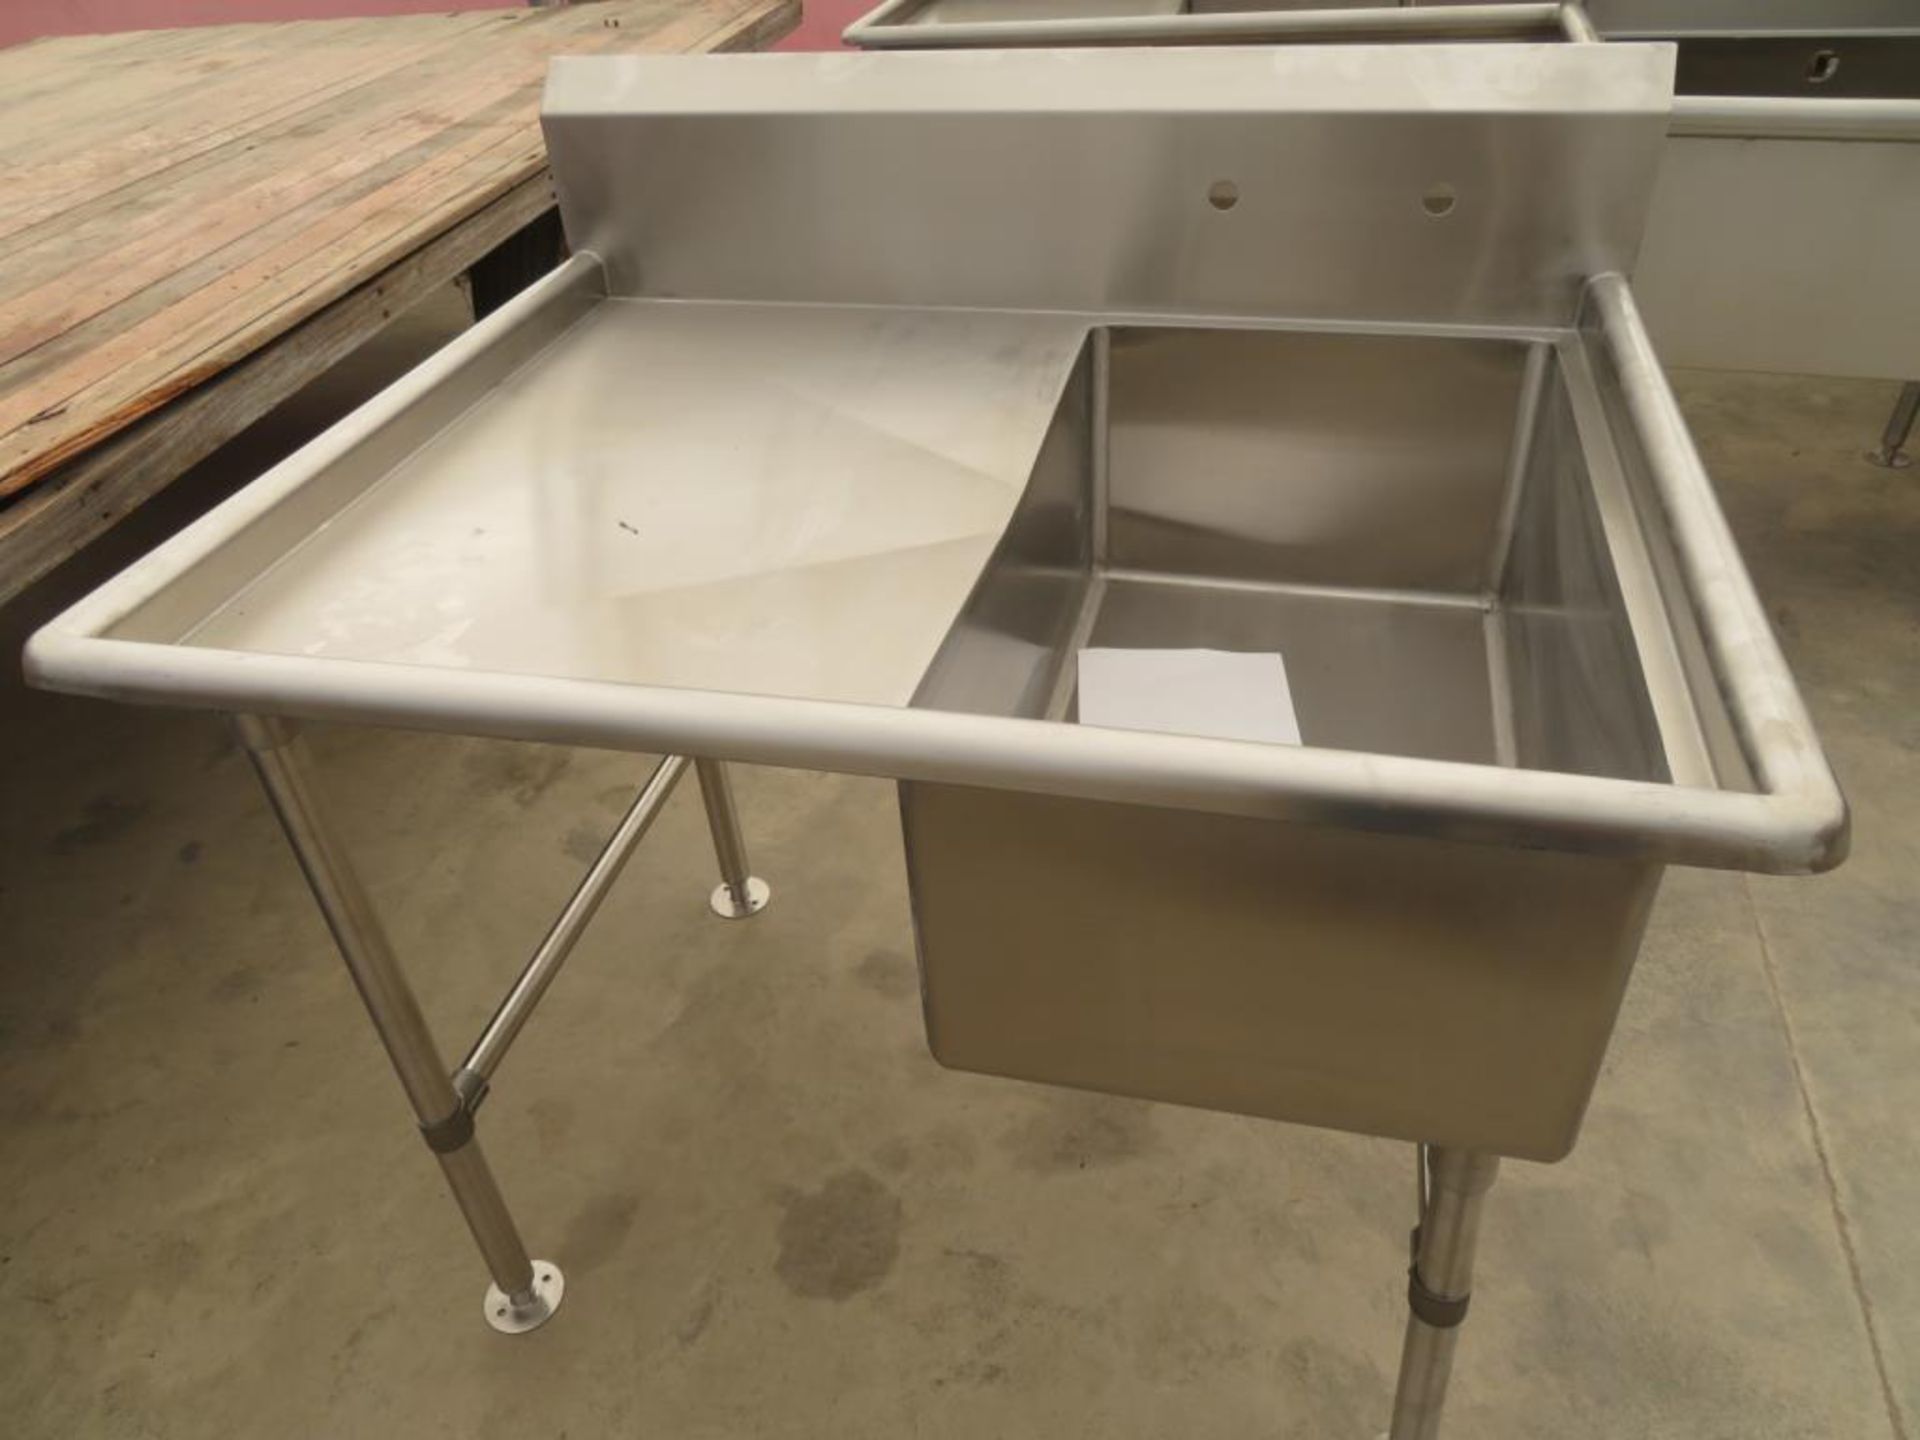 1 compartment sink, 1-18"x30"bowl with lever waste bracket with 24' drainboard left